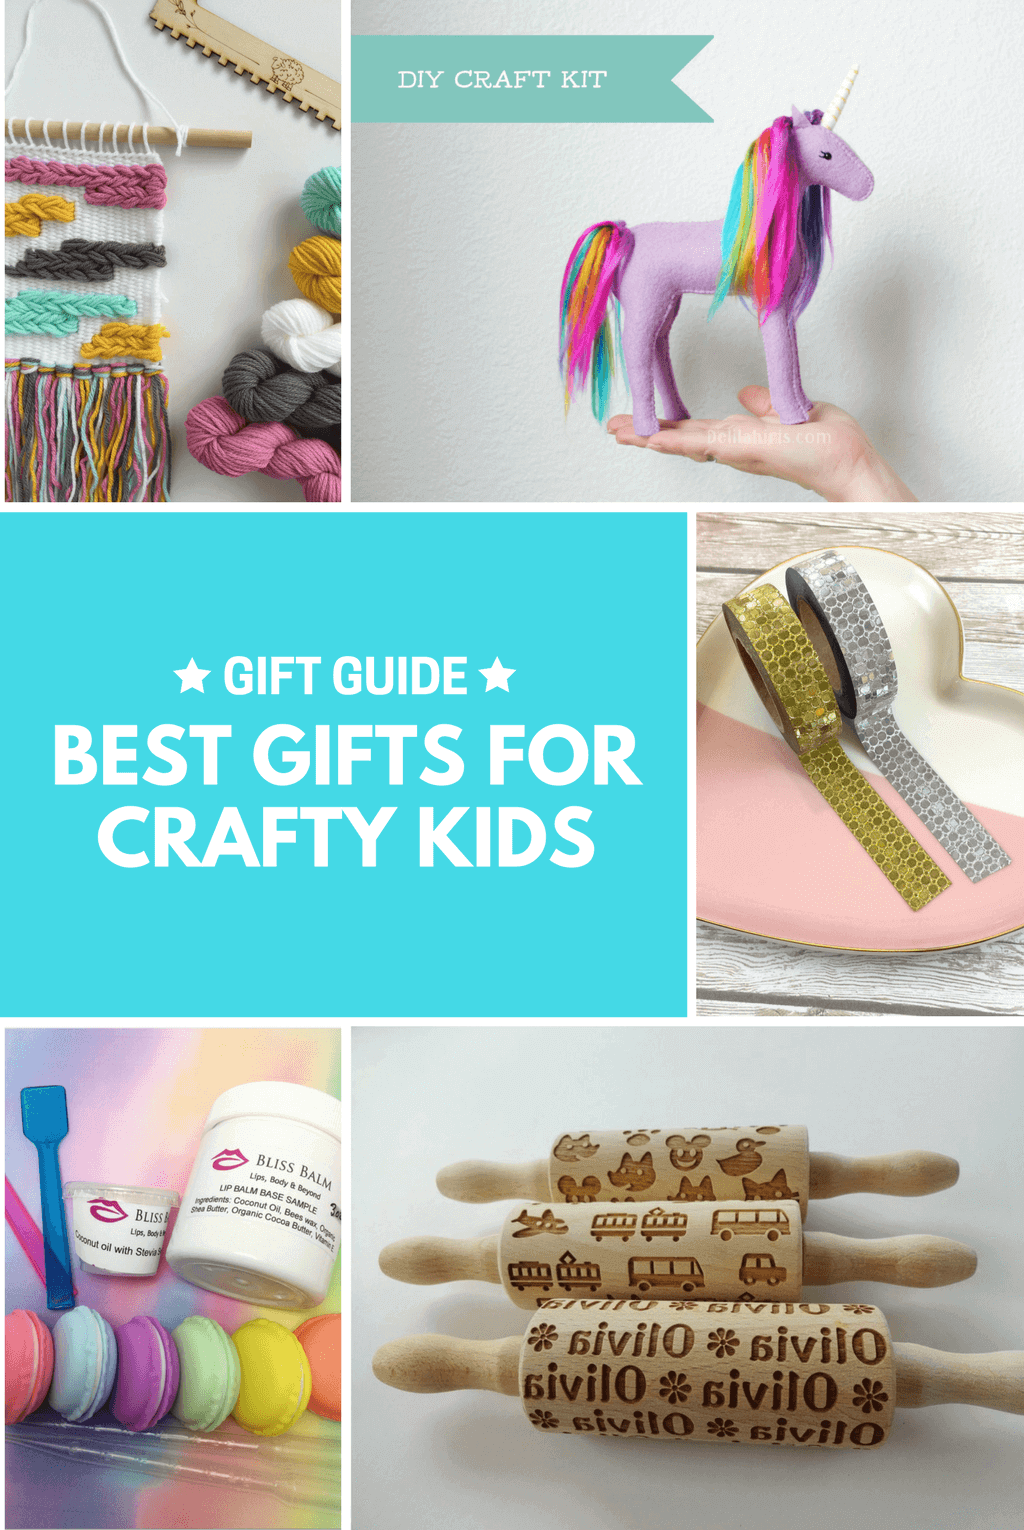 Best Gifts for Crafty Kids | Craft Gift Guide for ages 5-14 - craft gifts for all! #giftguide #christmasgifts #kidsgifts #gifts #craftkits